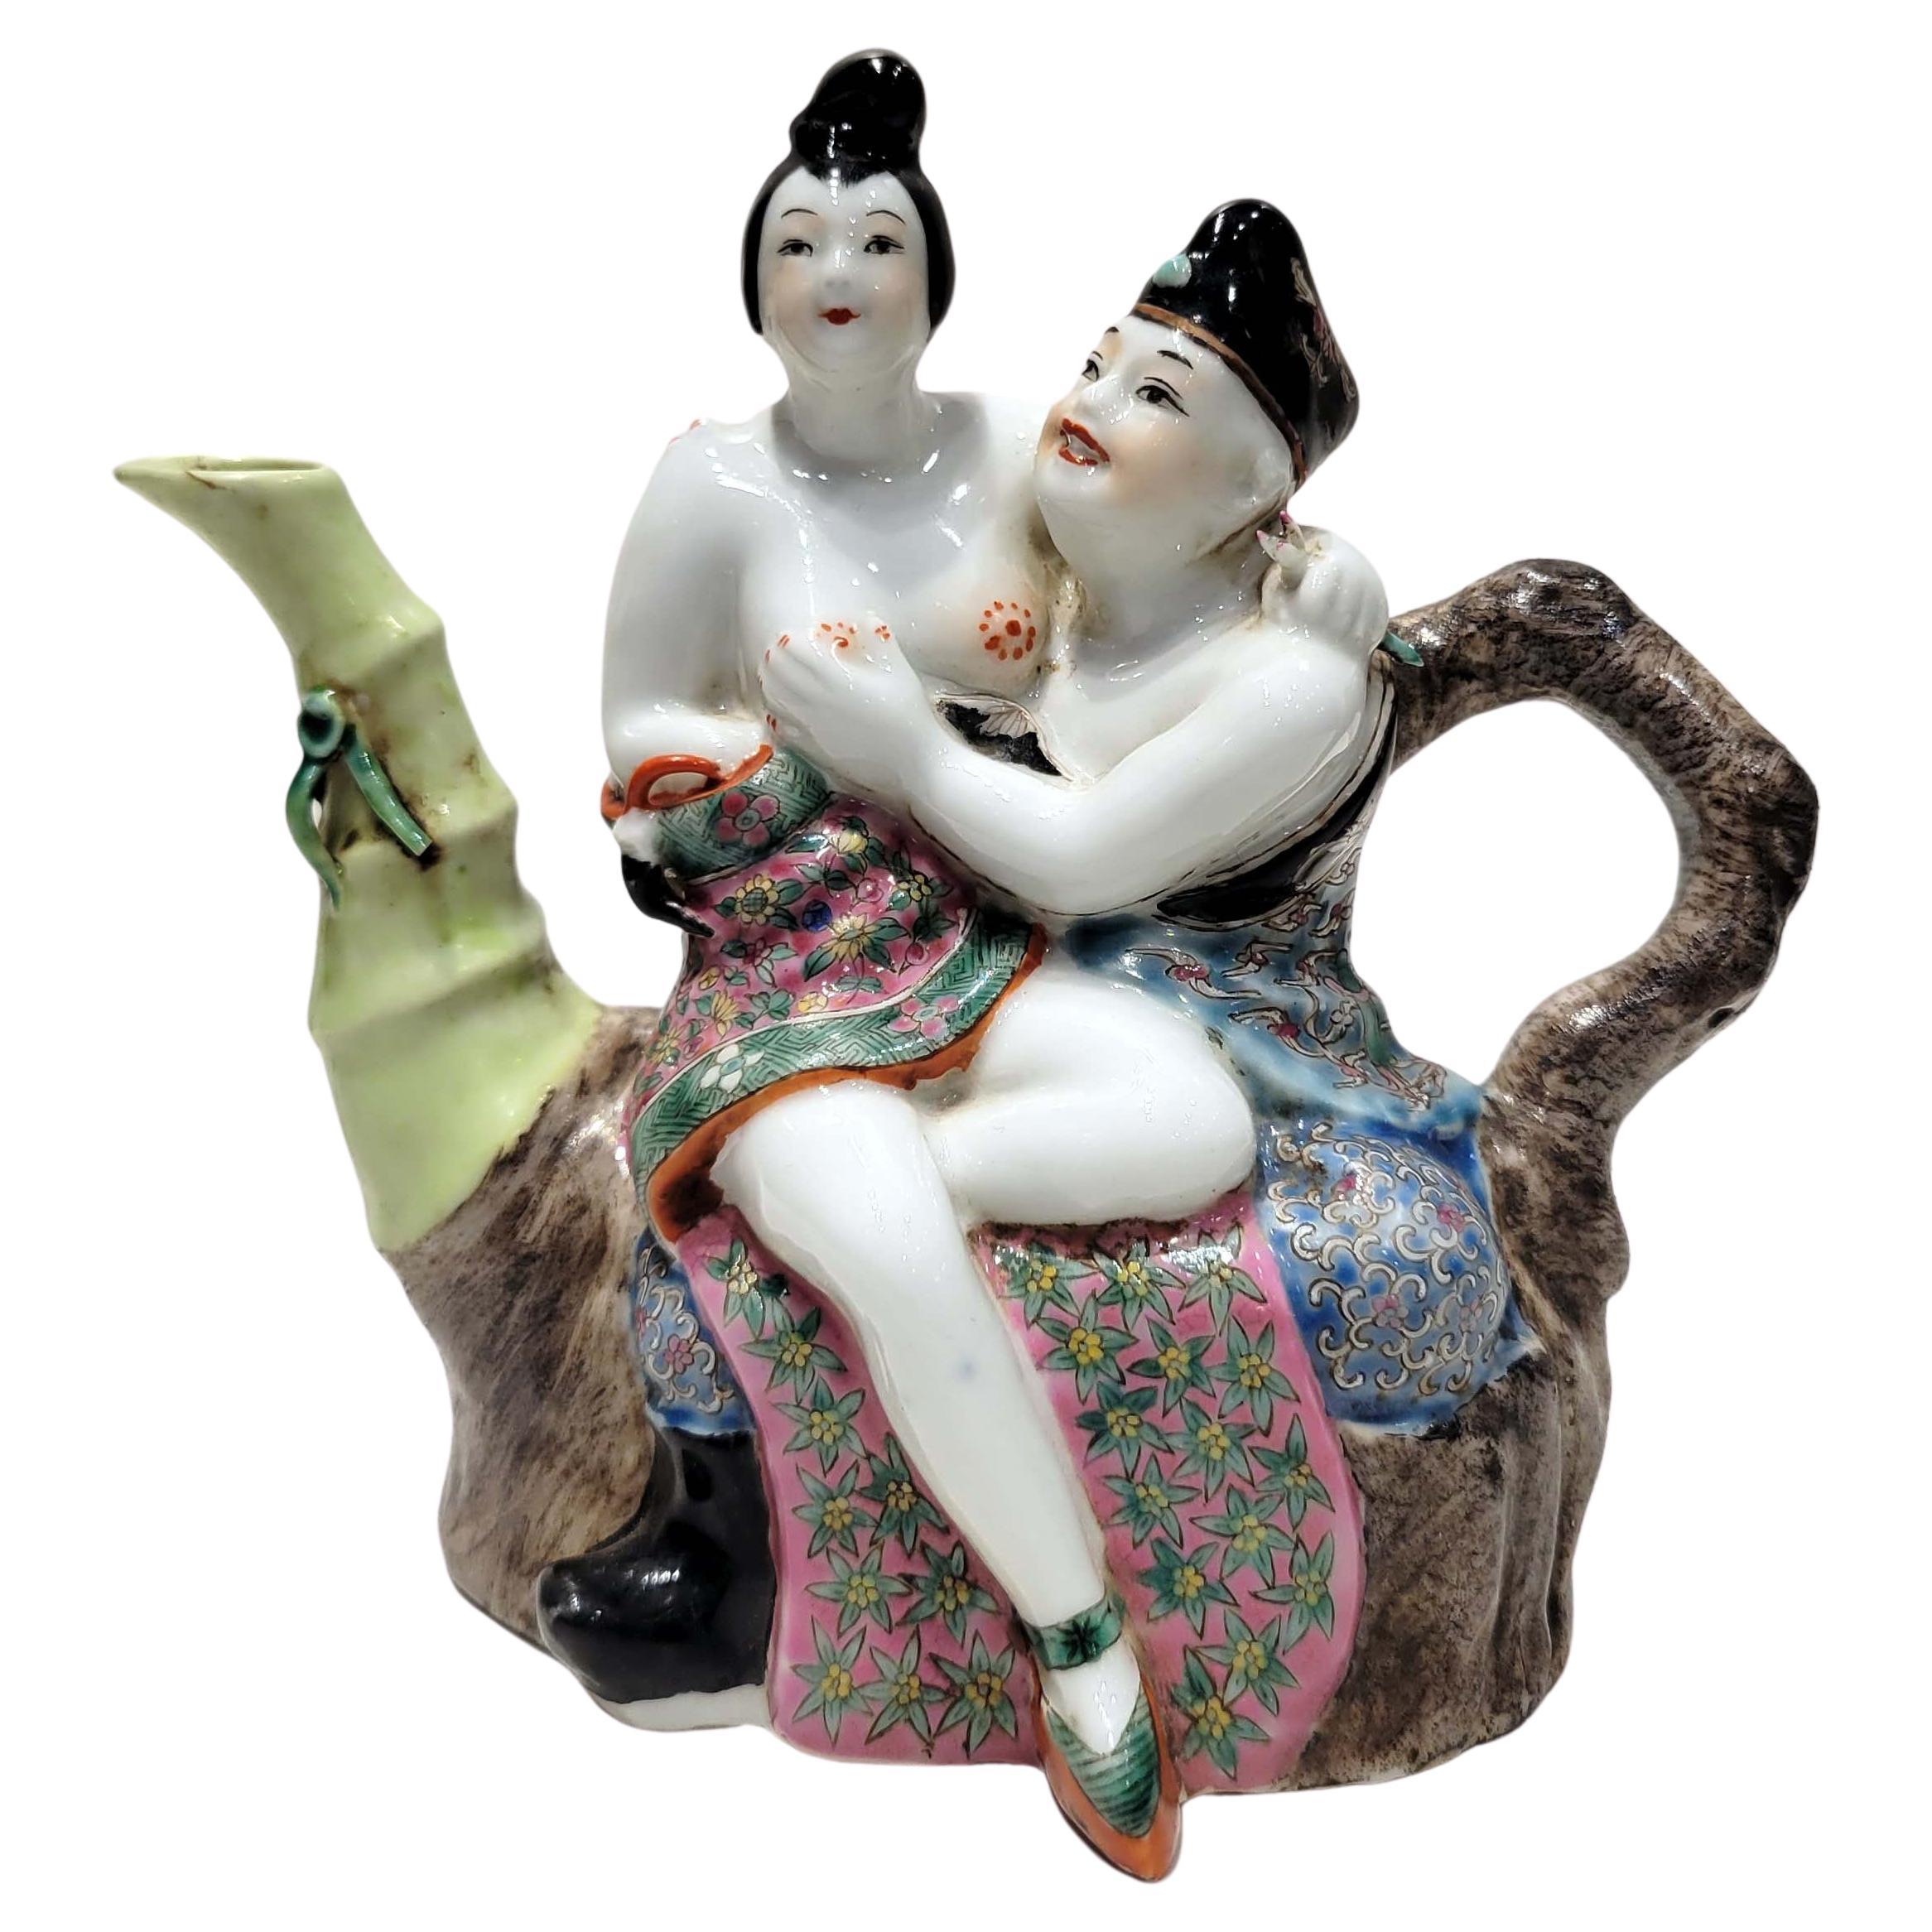 Republic Period Chinese Export Porcelain Wine Ewer, Erotic For Sale